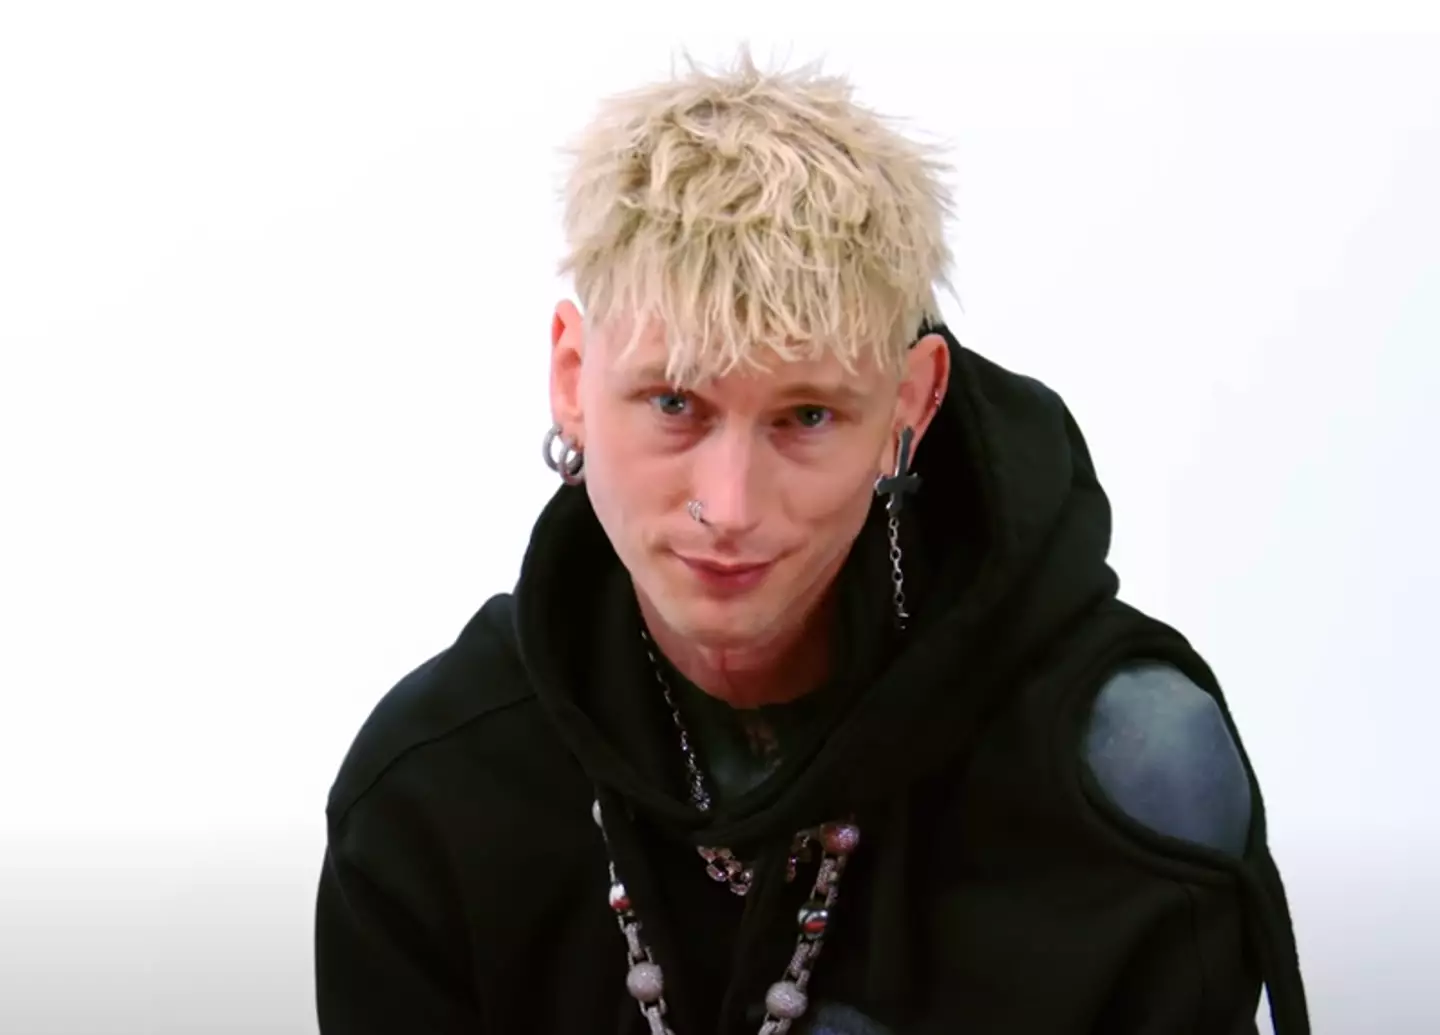 Machine Gun Kelly was smart enough to sidestep a tense moment between himself and the Swifties.(FirstWeFeast/YouTube)